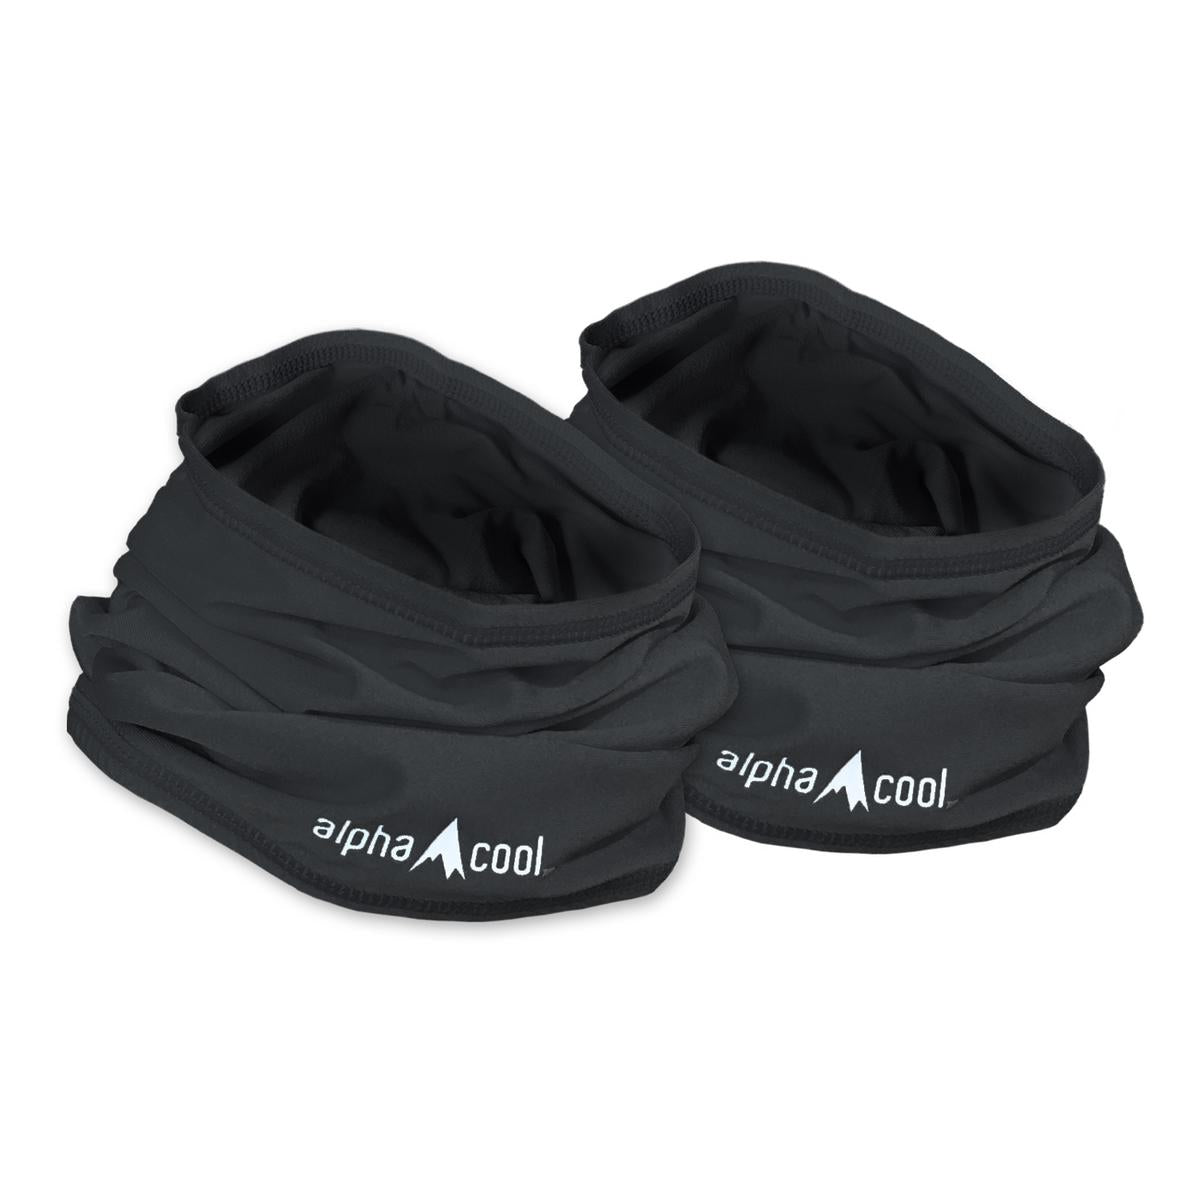 AlphaCool Cooling Neck Gaiter - 2 pack - Cooling